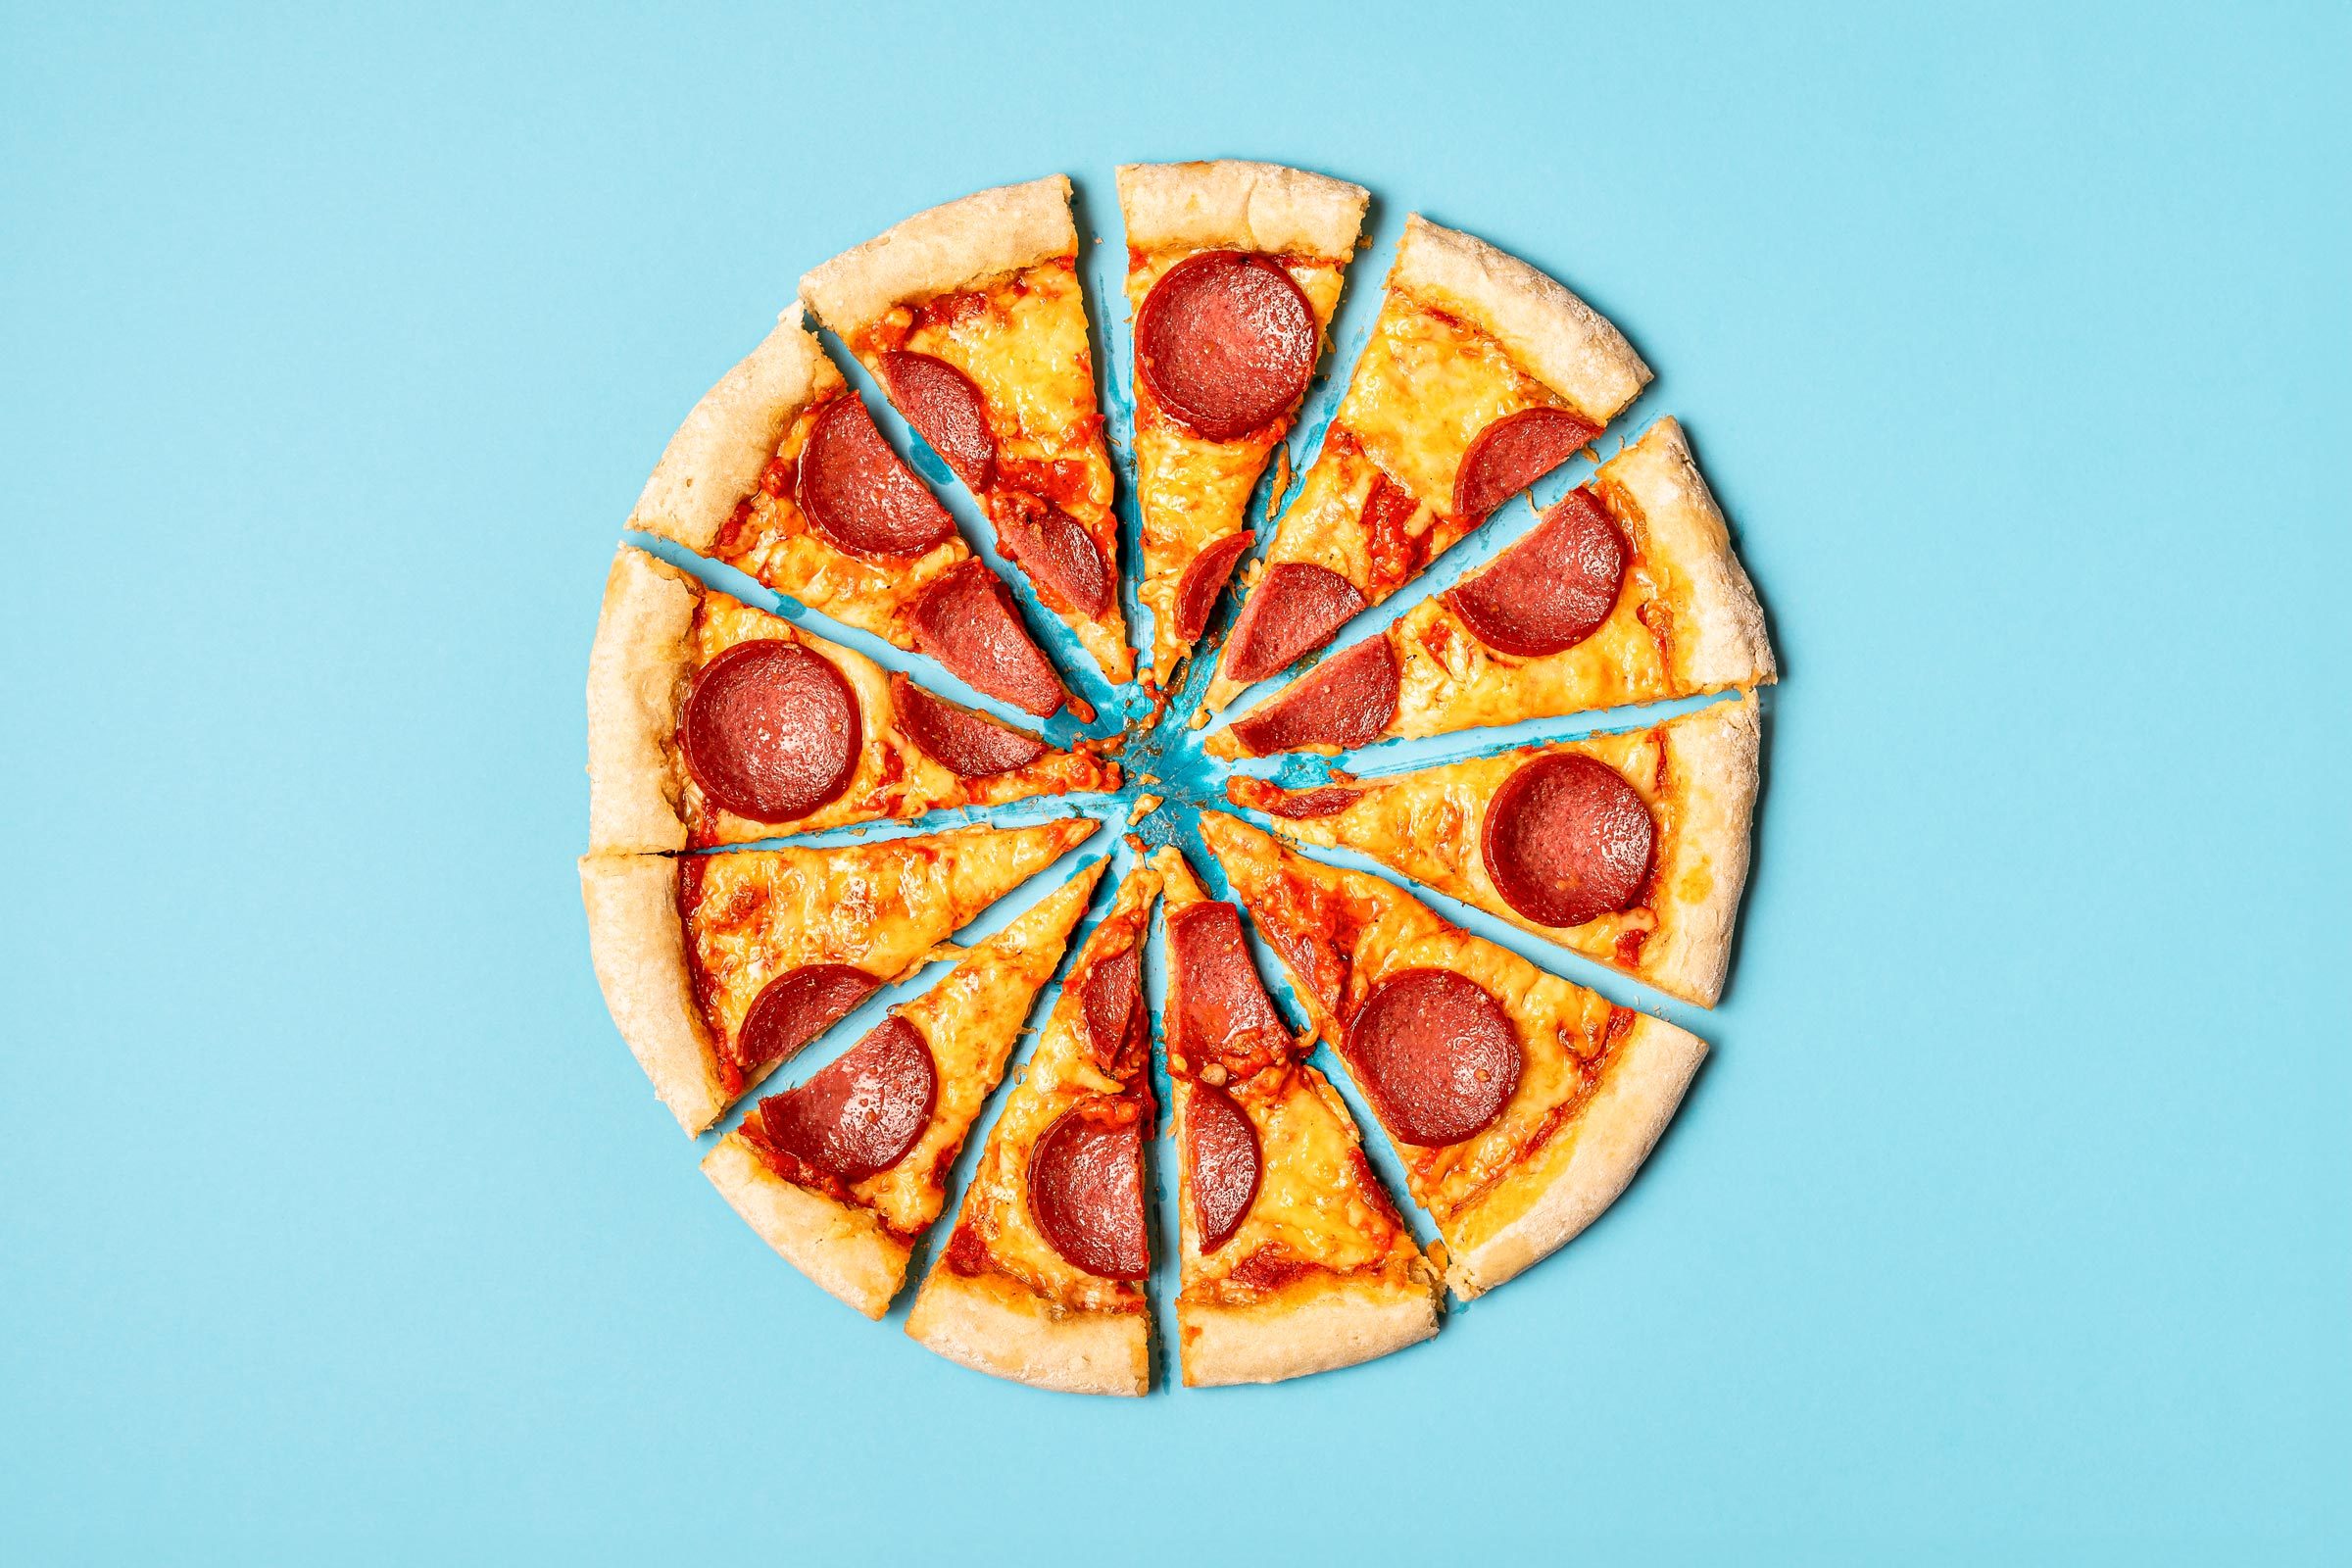 slices of pizza making a whole pizza on a blue background